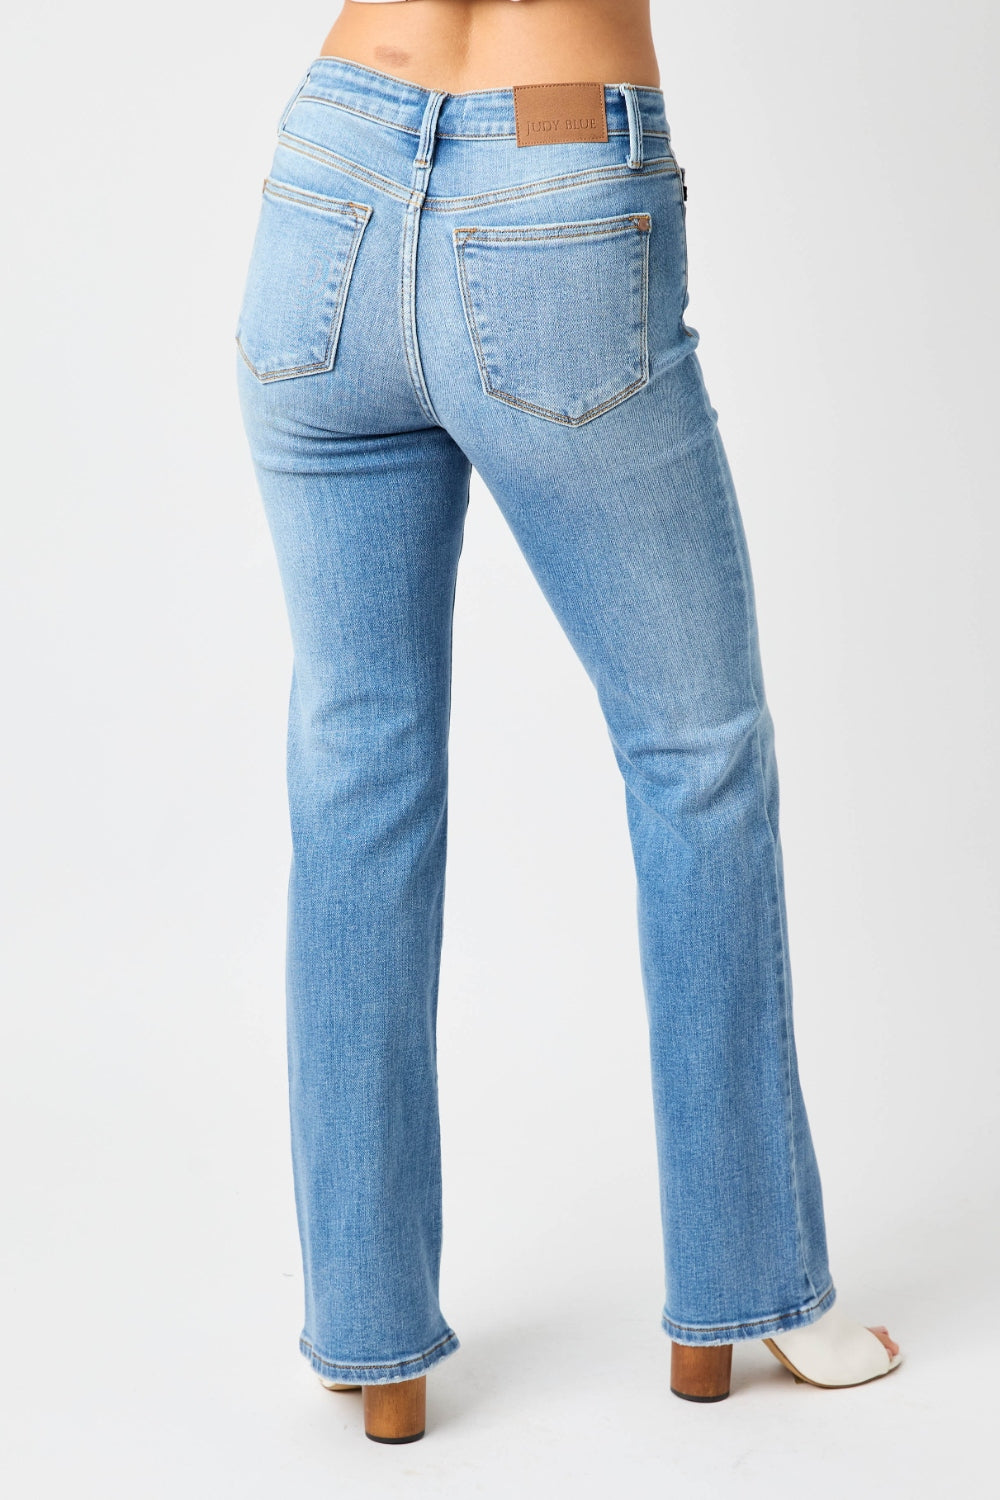 Judy Blue Full Size High Waist Straight Jeans-Denim-Inspired by Justeen-Women's Clothing Boutique